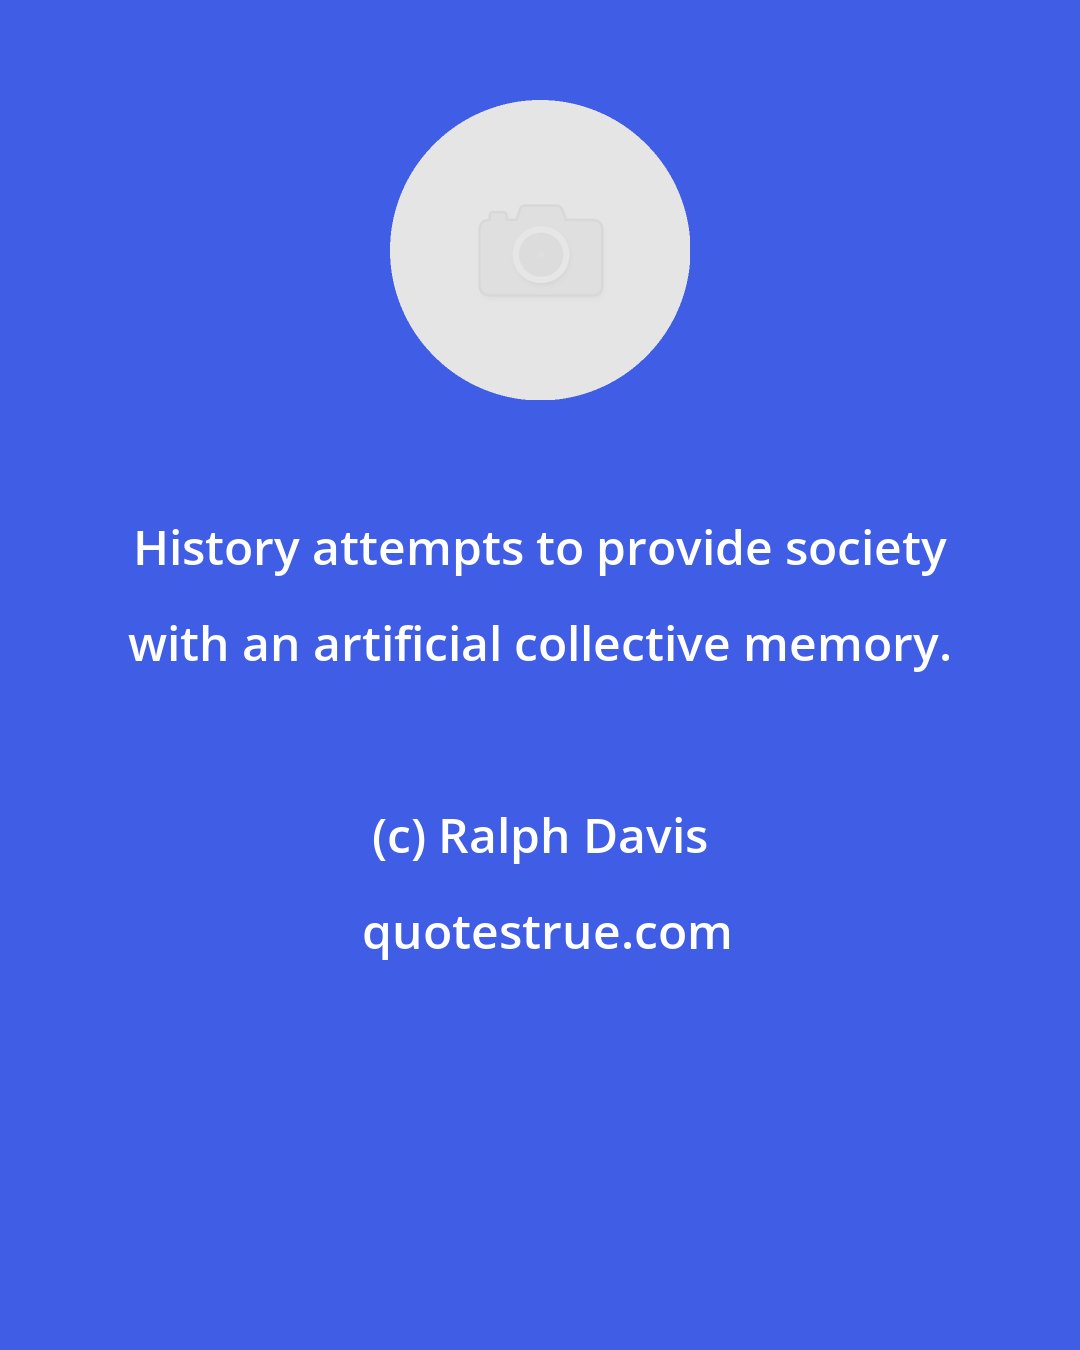 Ralph Davis: History attempts to provide society with an artificial collective memory.